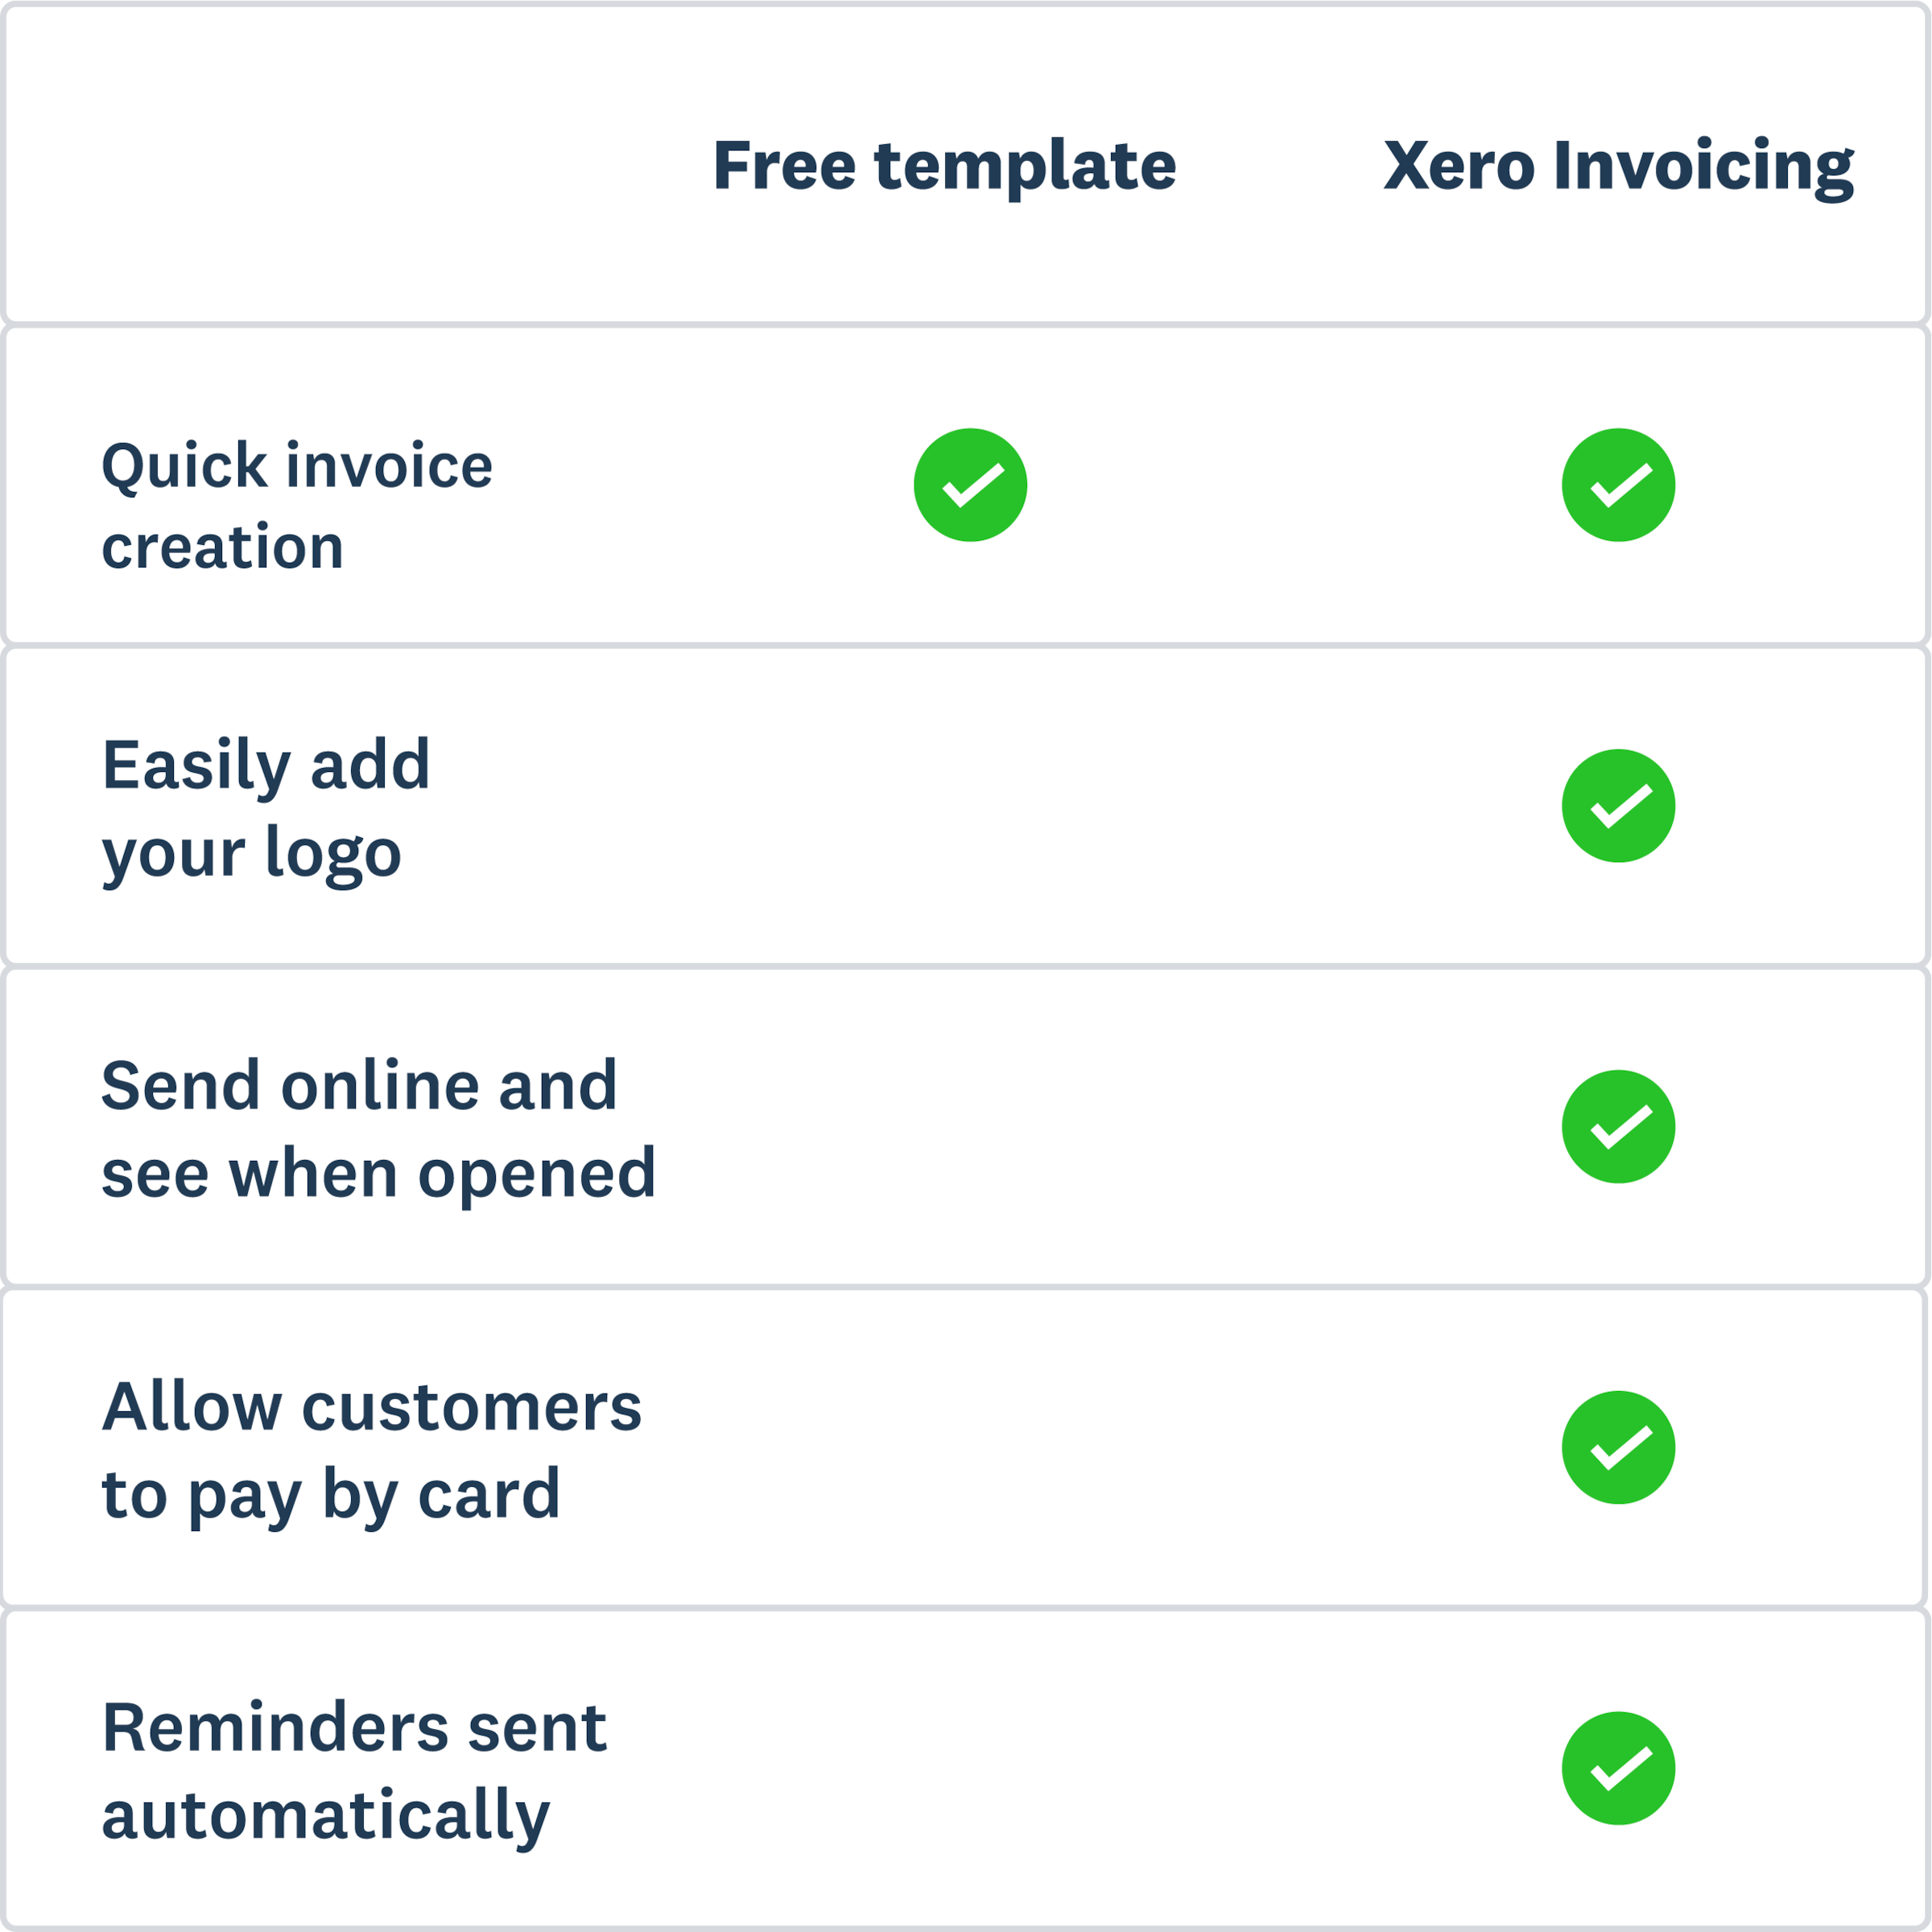 A table comparing the free invoice template to the Xero product